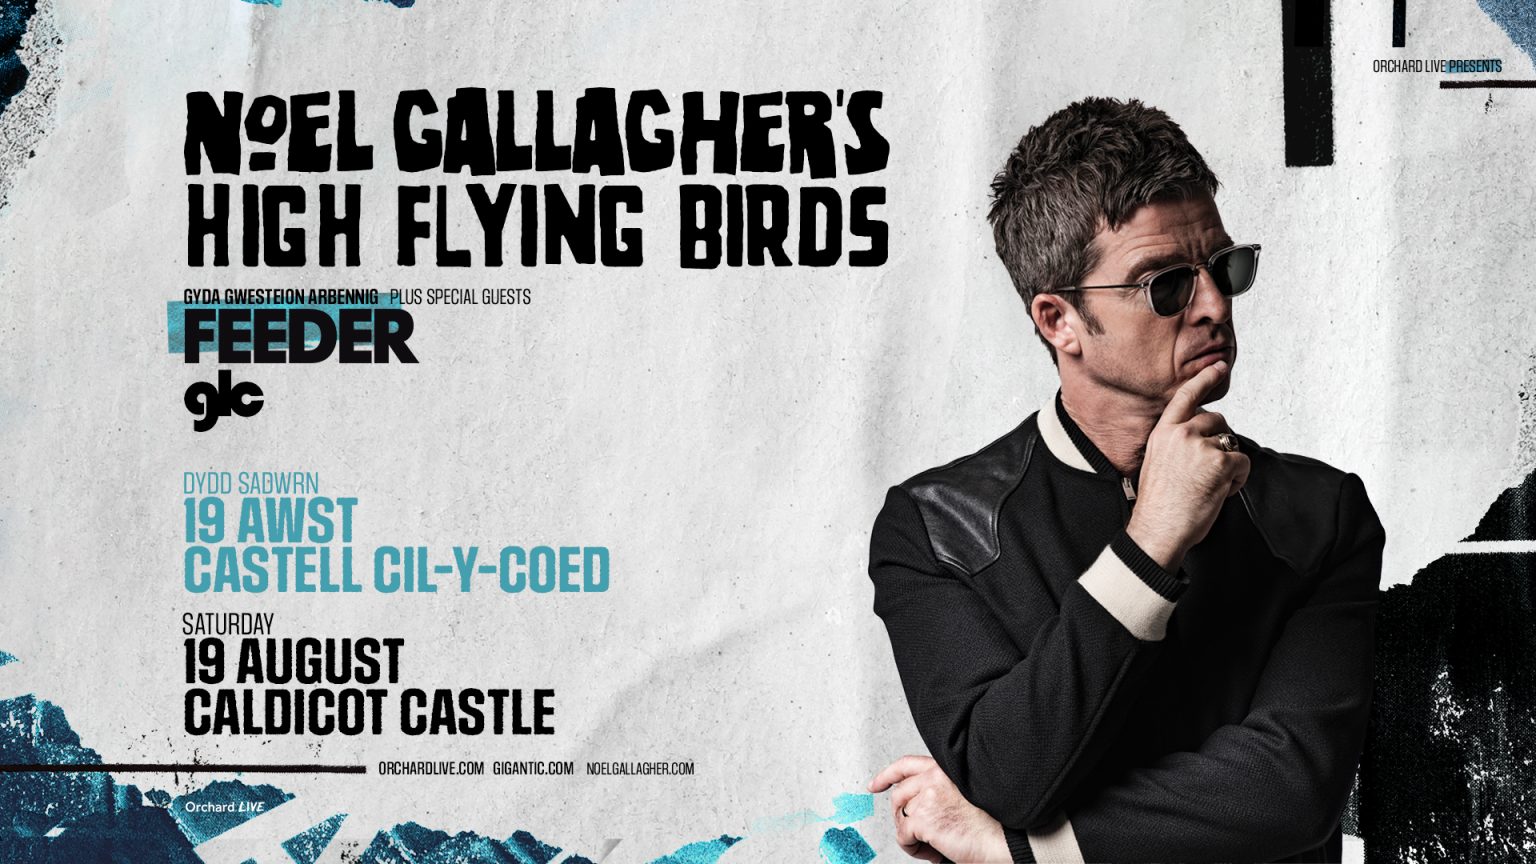 noel gallagher tour wales